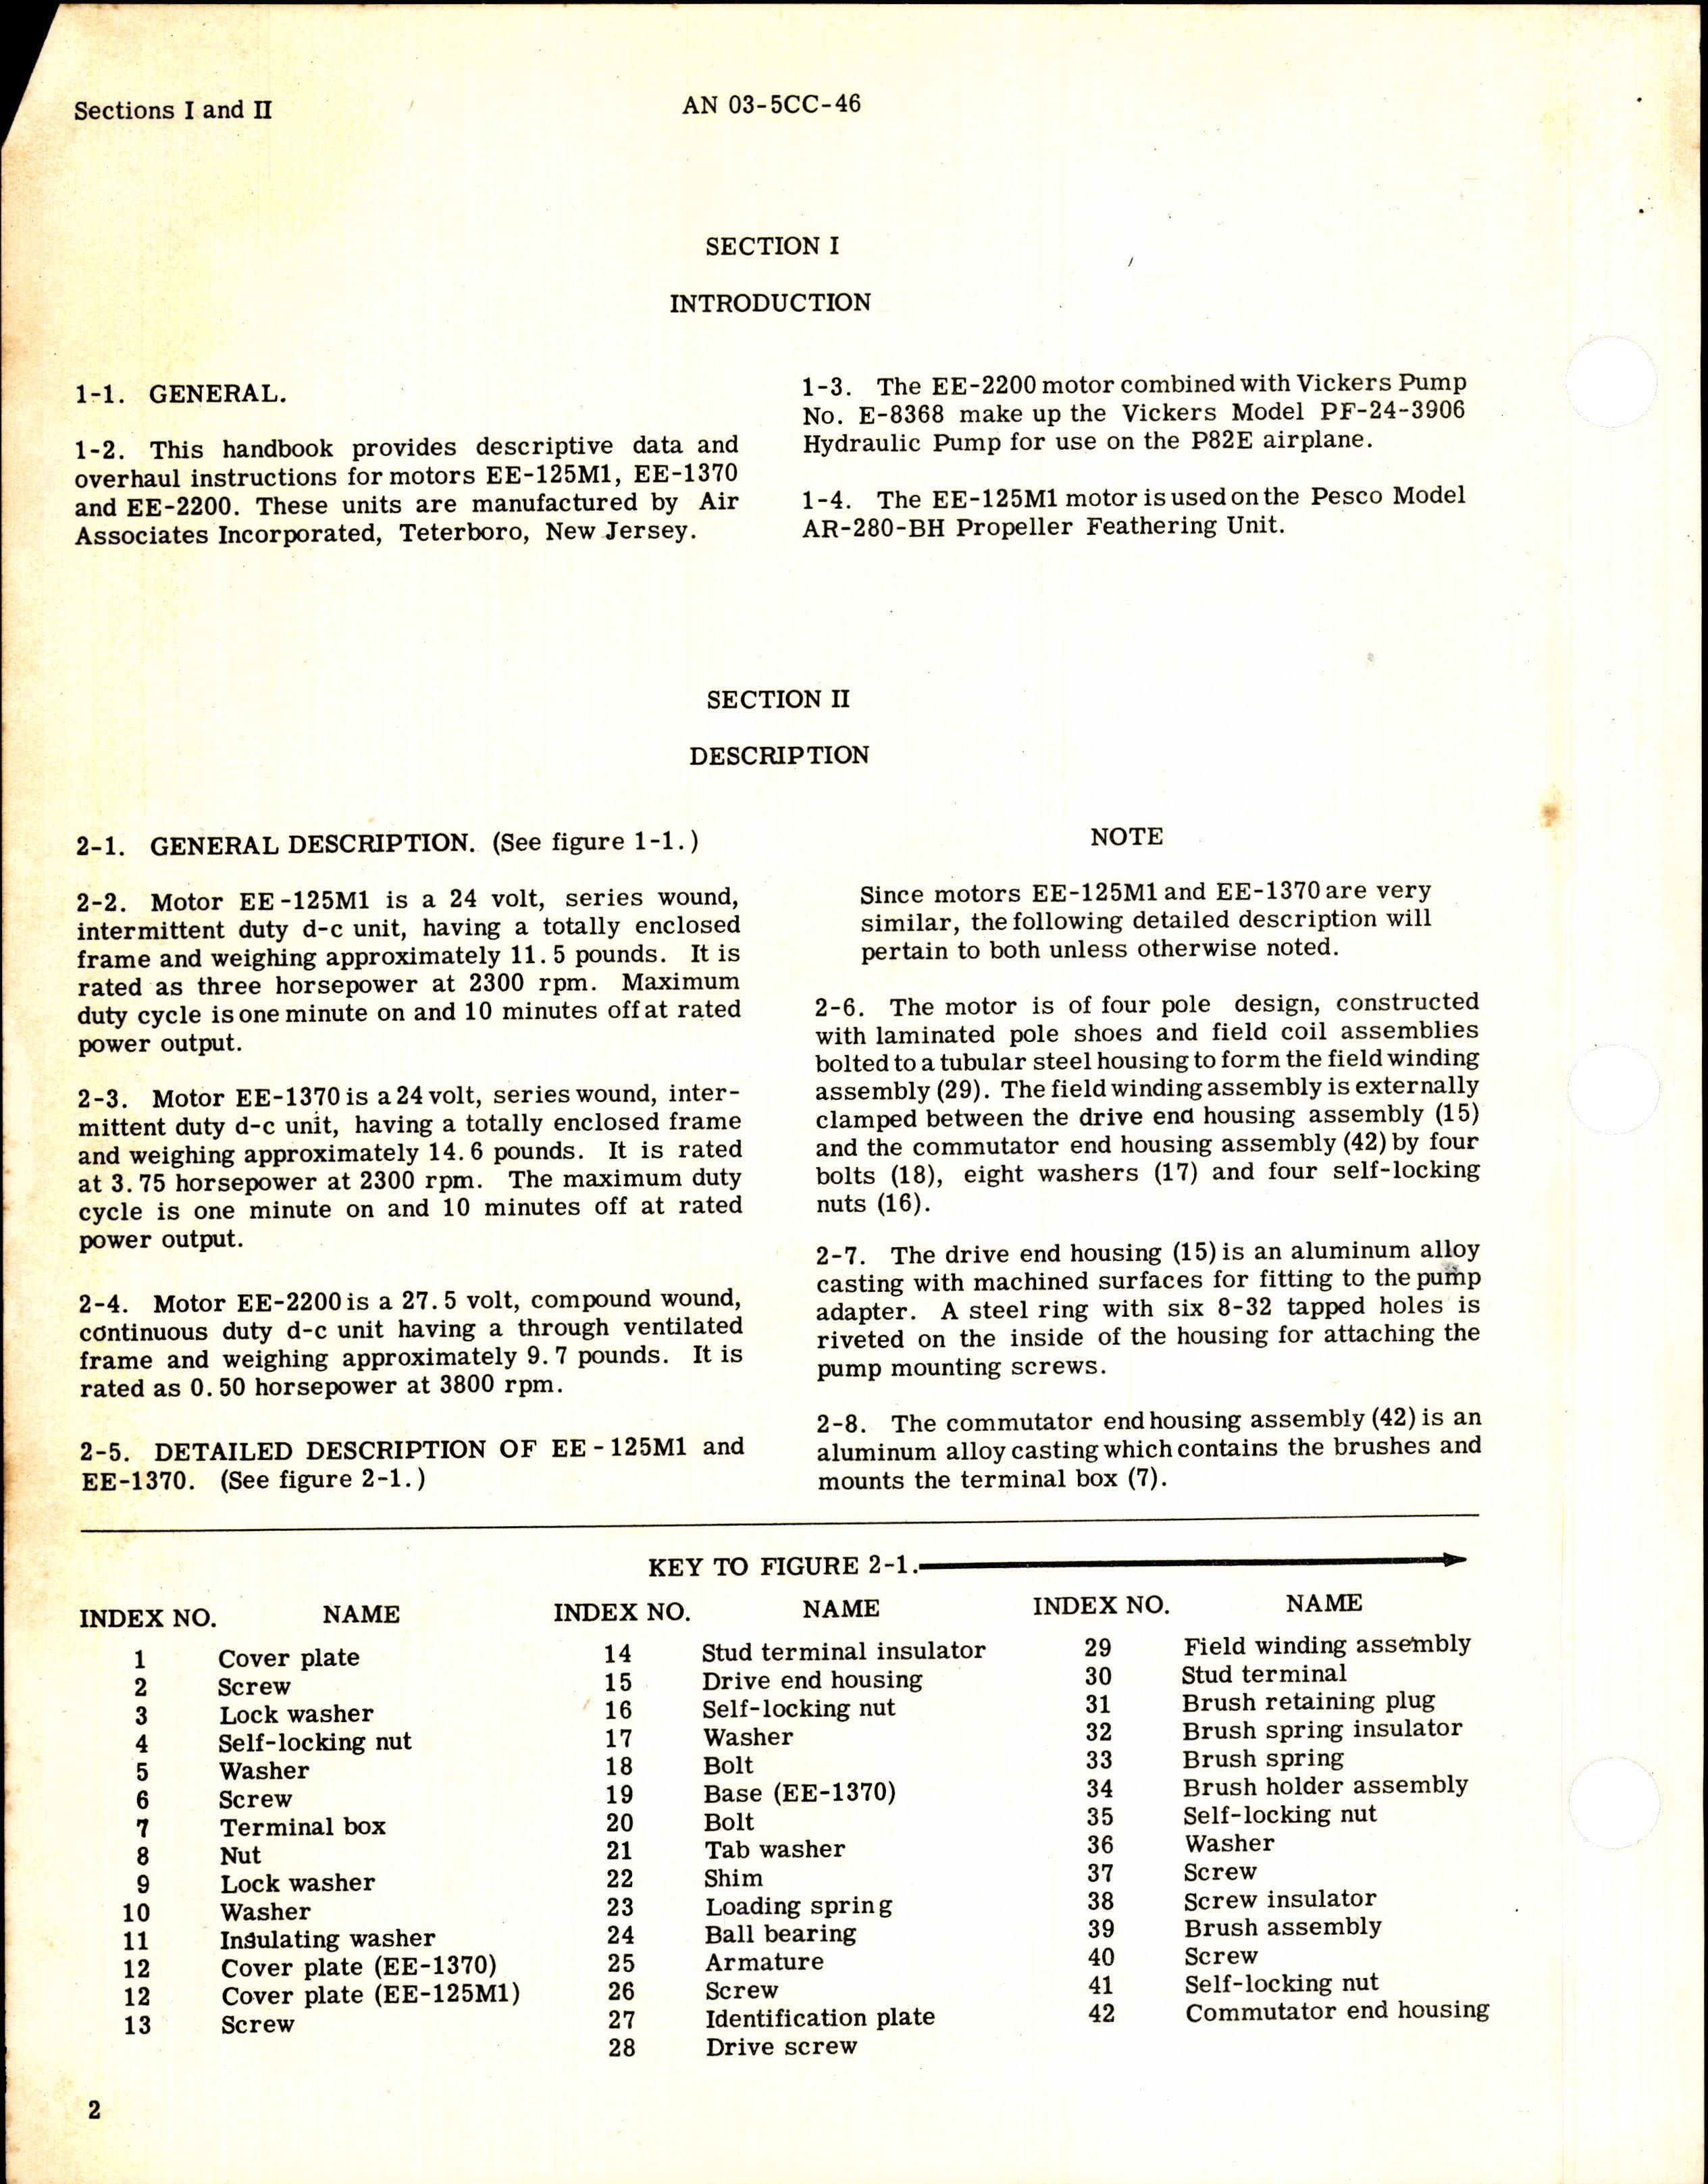 Sample page 4 from AirCorps Library document: Overhaul Instructions for Air Associates Electric Motors